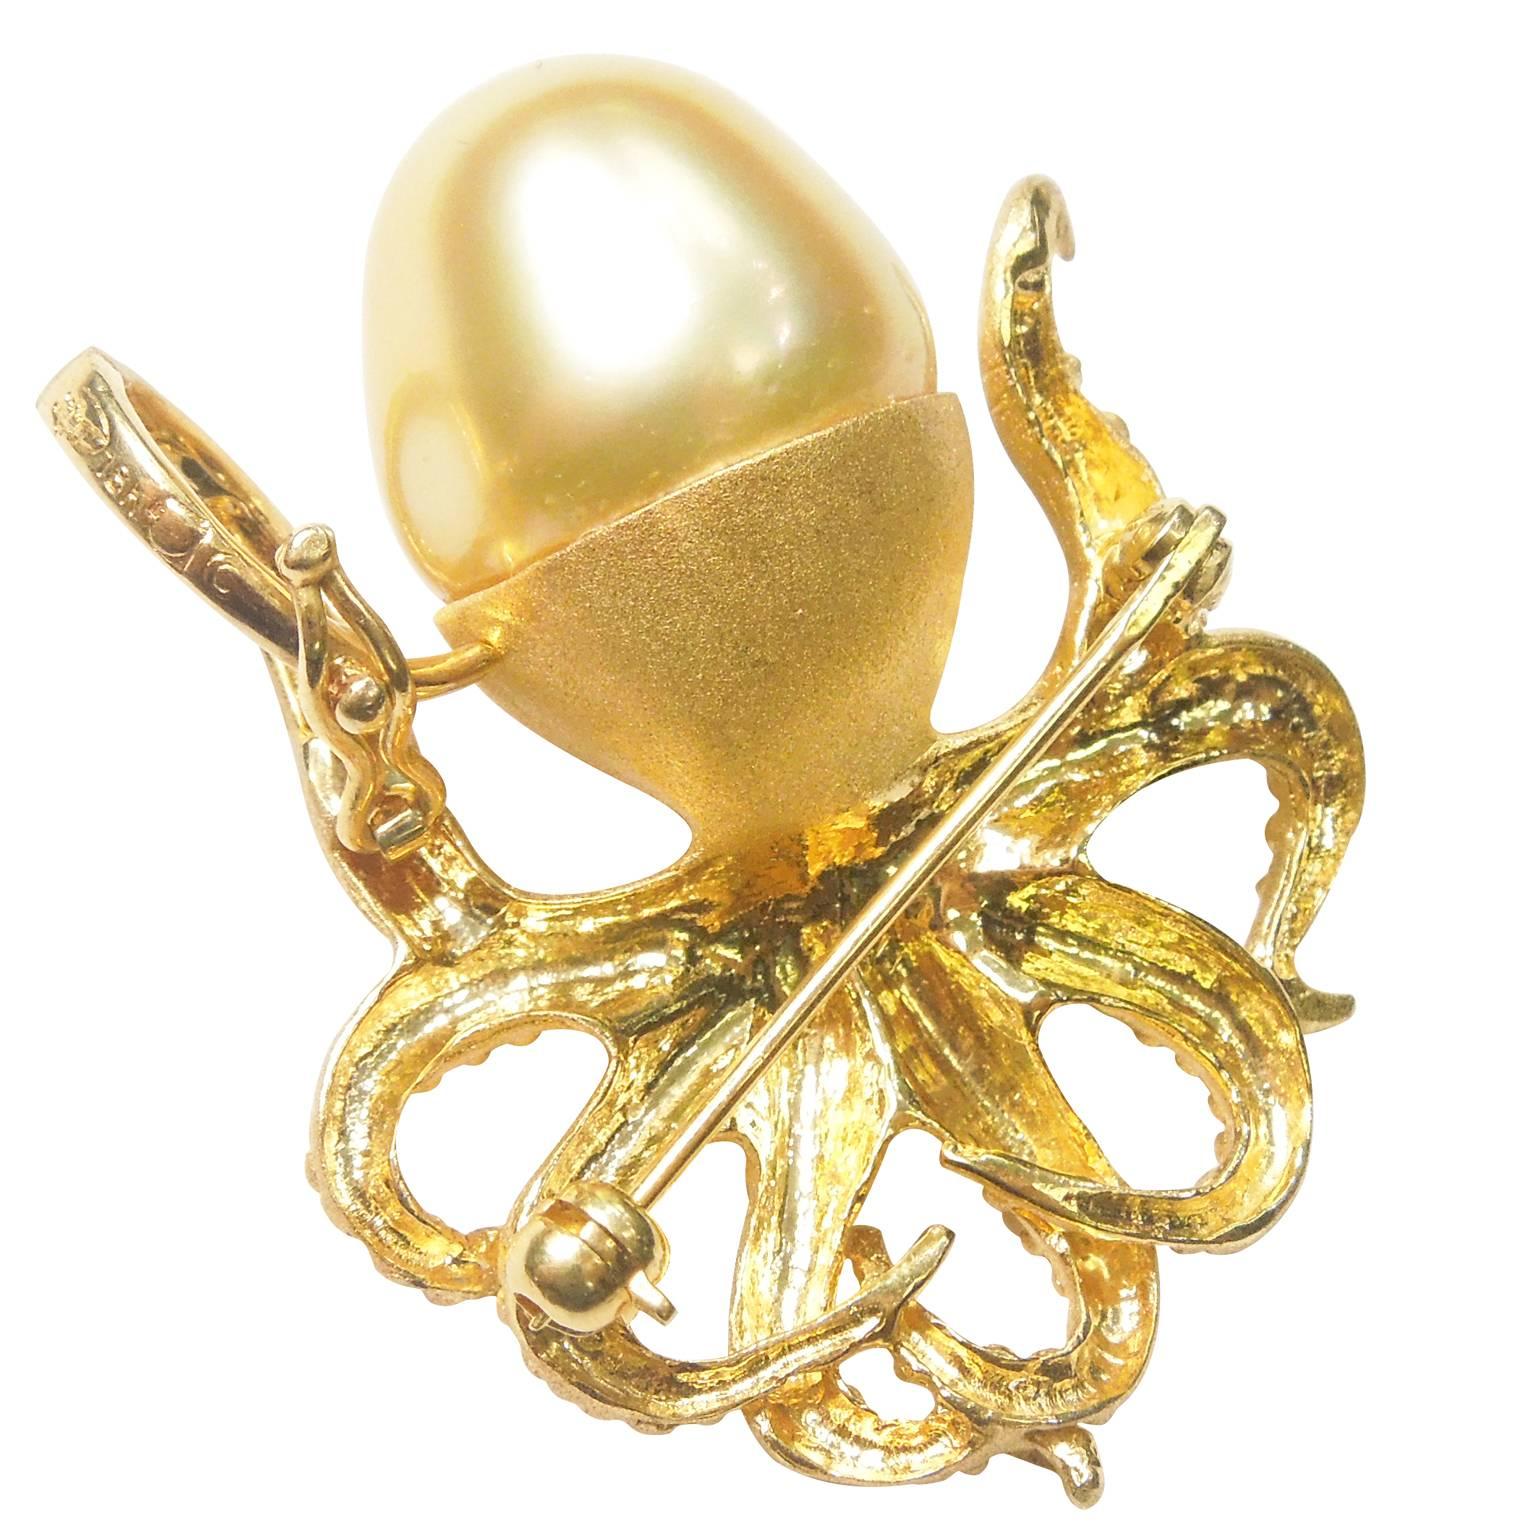 18K Gold Octopus Pendant and Brooch with South Sea Pearl

Stunning One of a Kind Piece

Can be worn as a pendant or brooch. Has both options.

Octopus has slight touch of diamond in the eyes. 

South Sea Pearl is golden yellow. 

Octopus is 1.5